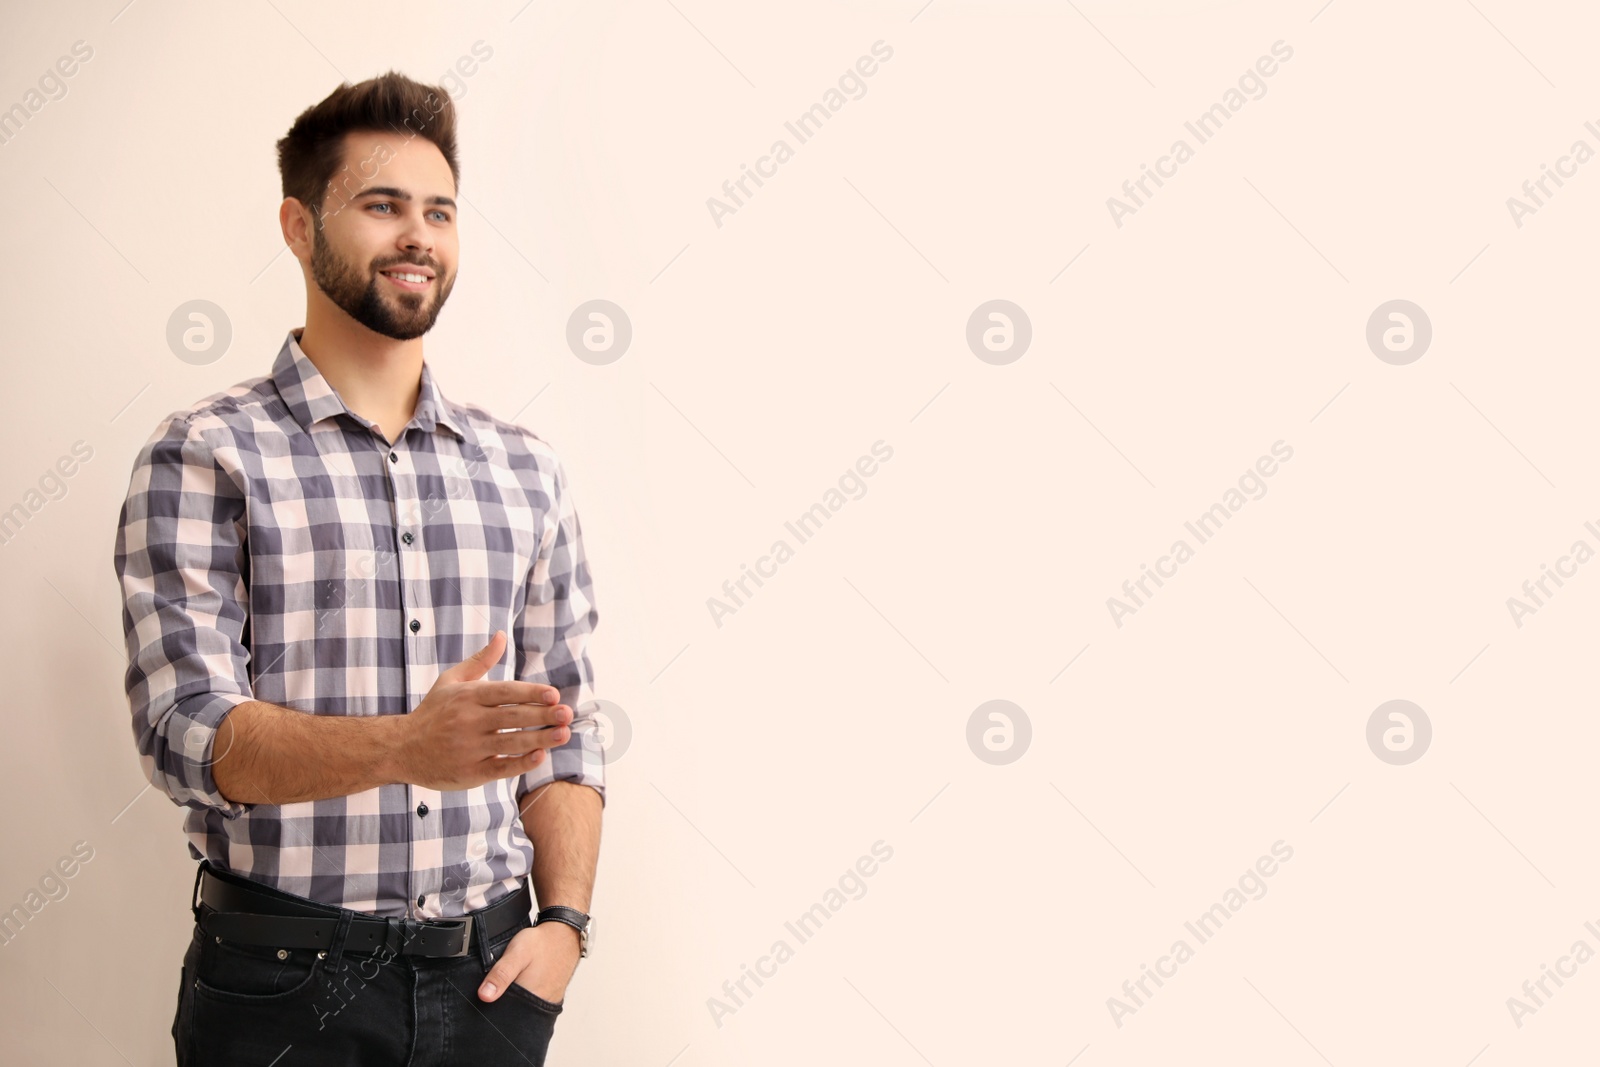 Photo of Man offering handshake on beige background, space for text